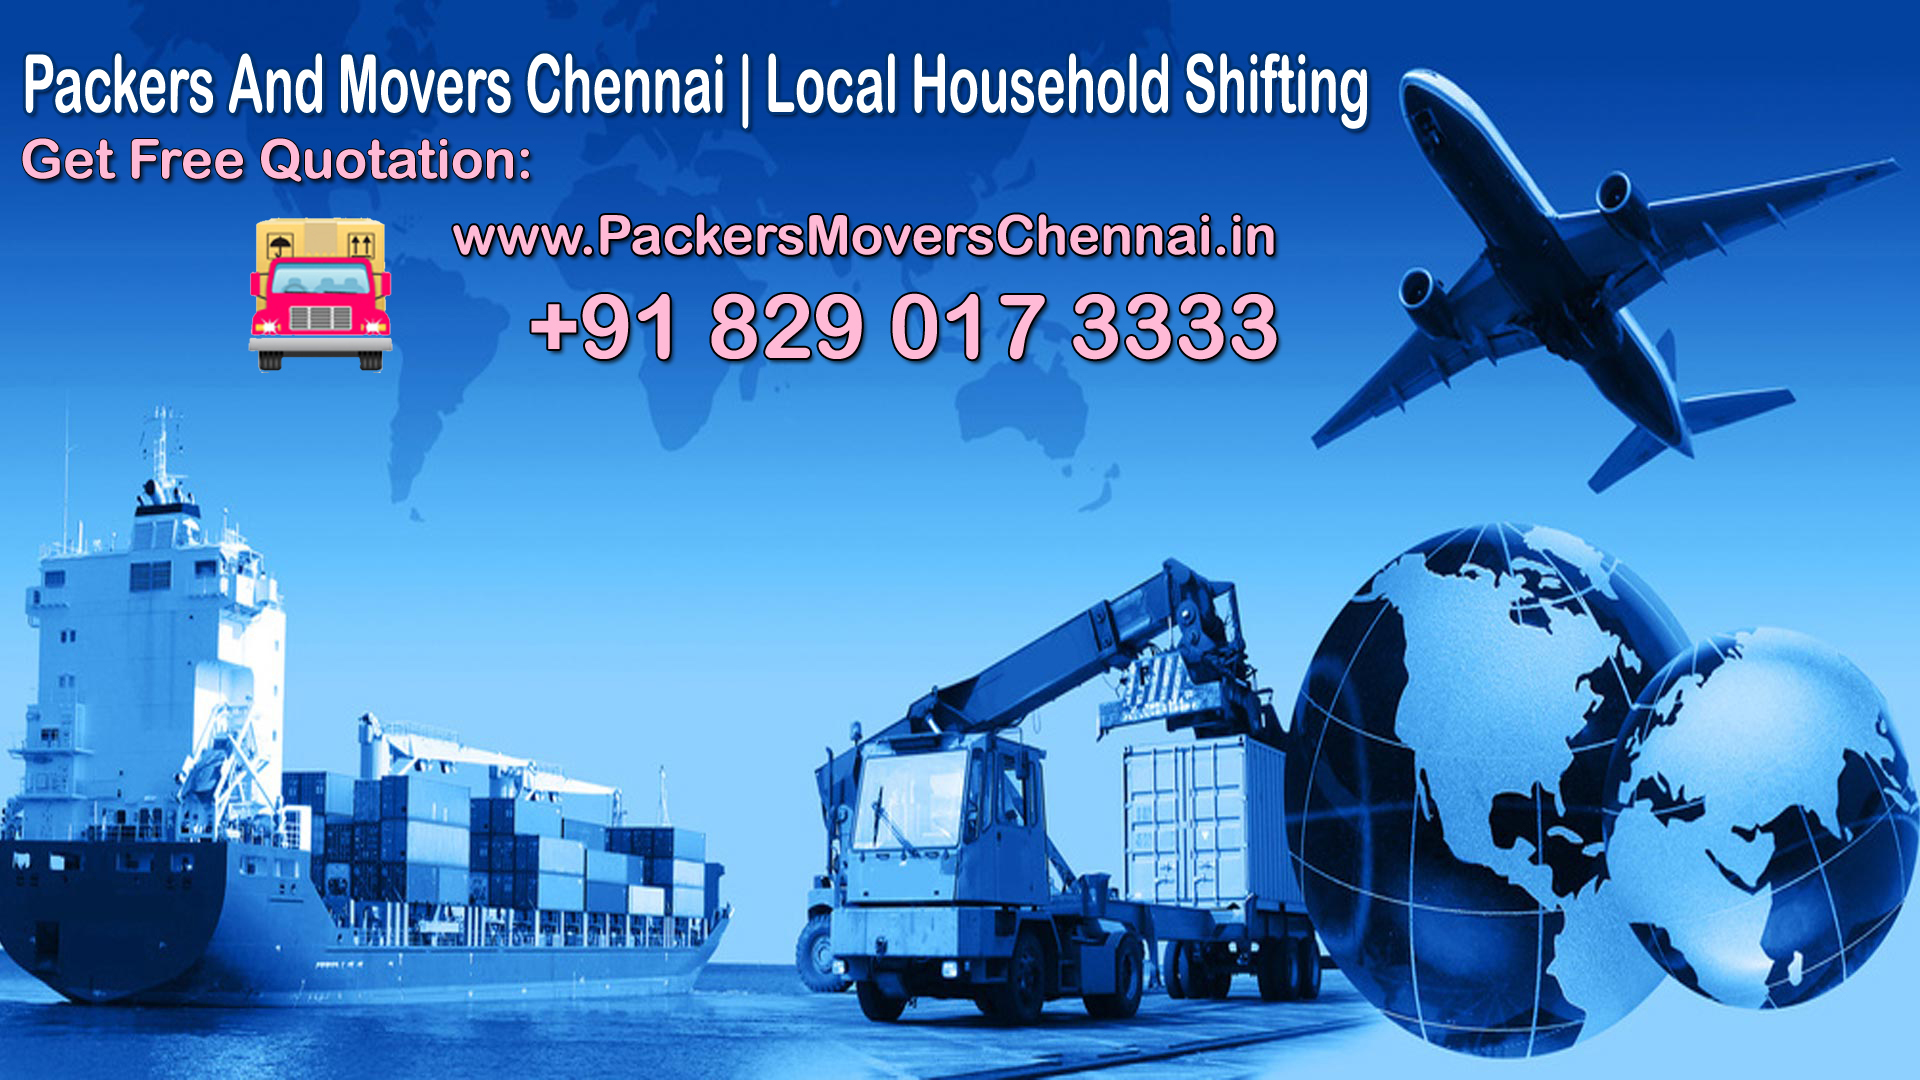 We Provide Best Packers And Movers Chennai List for Get Free Best Quotes, Compare Charges, Save Mone